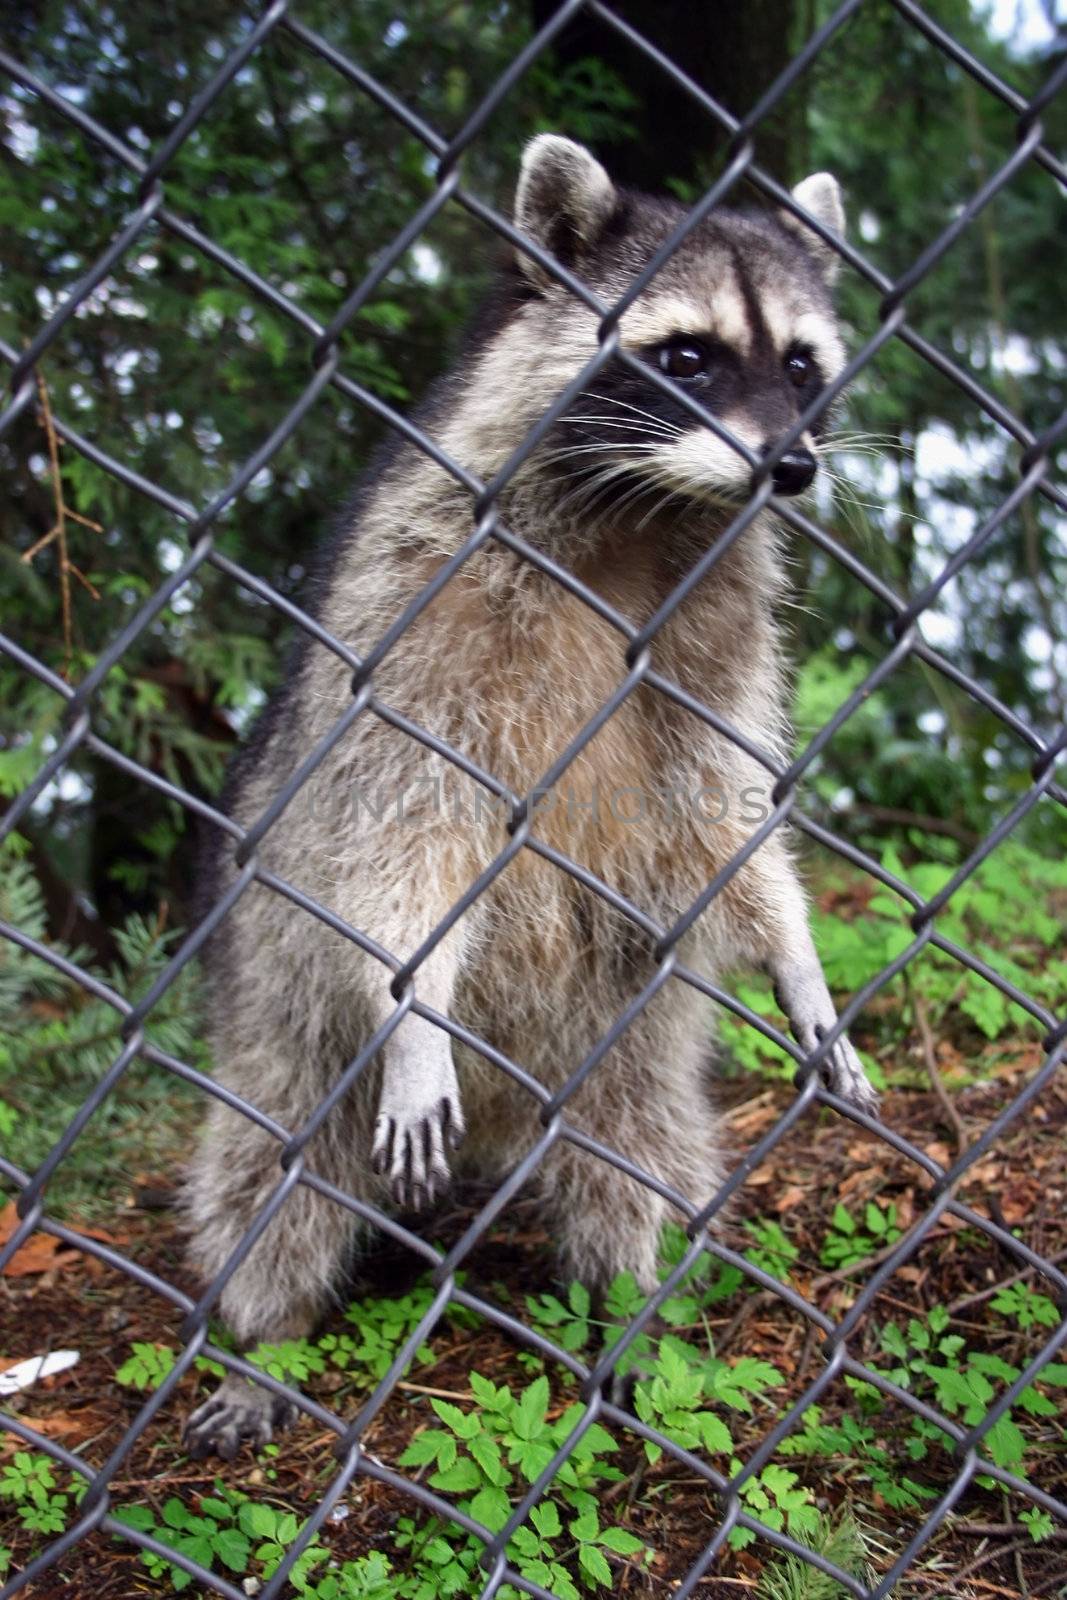 Medium size raccoon begging for food from behind a fence
